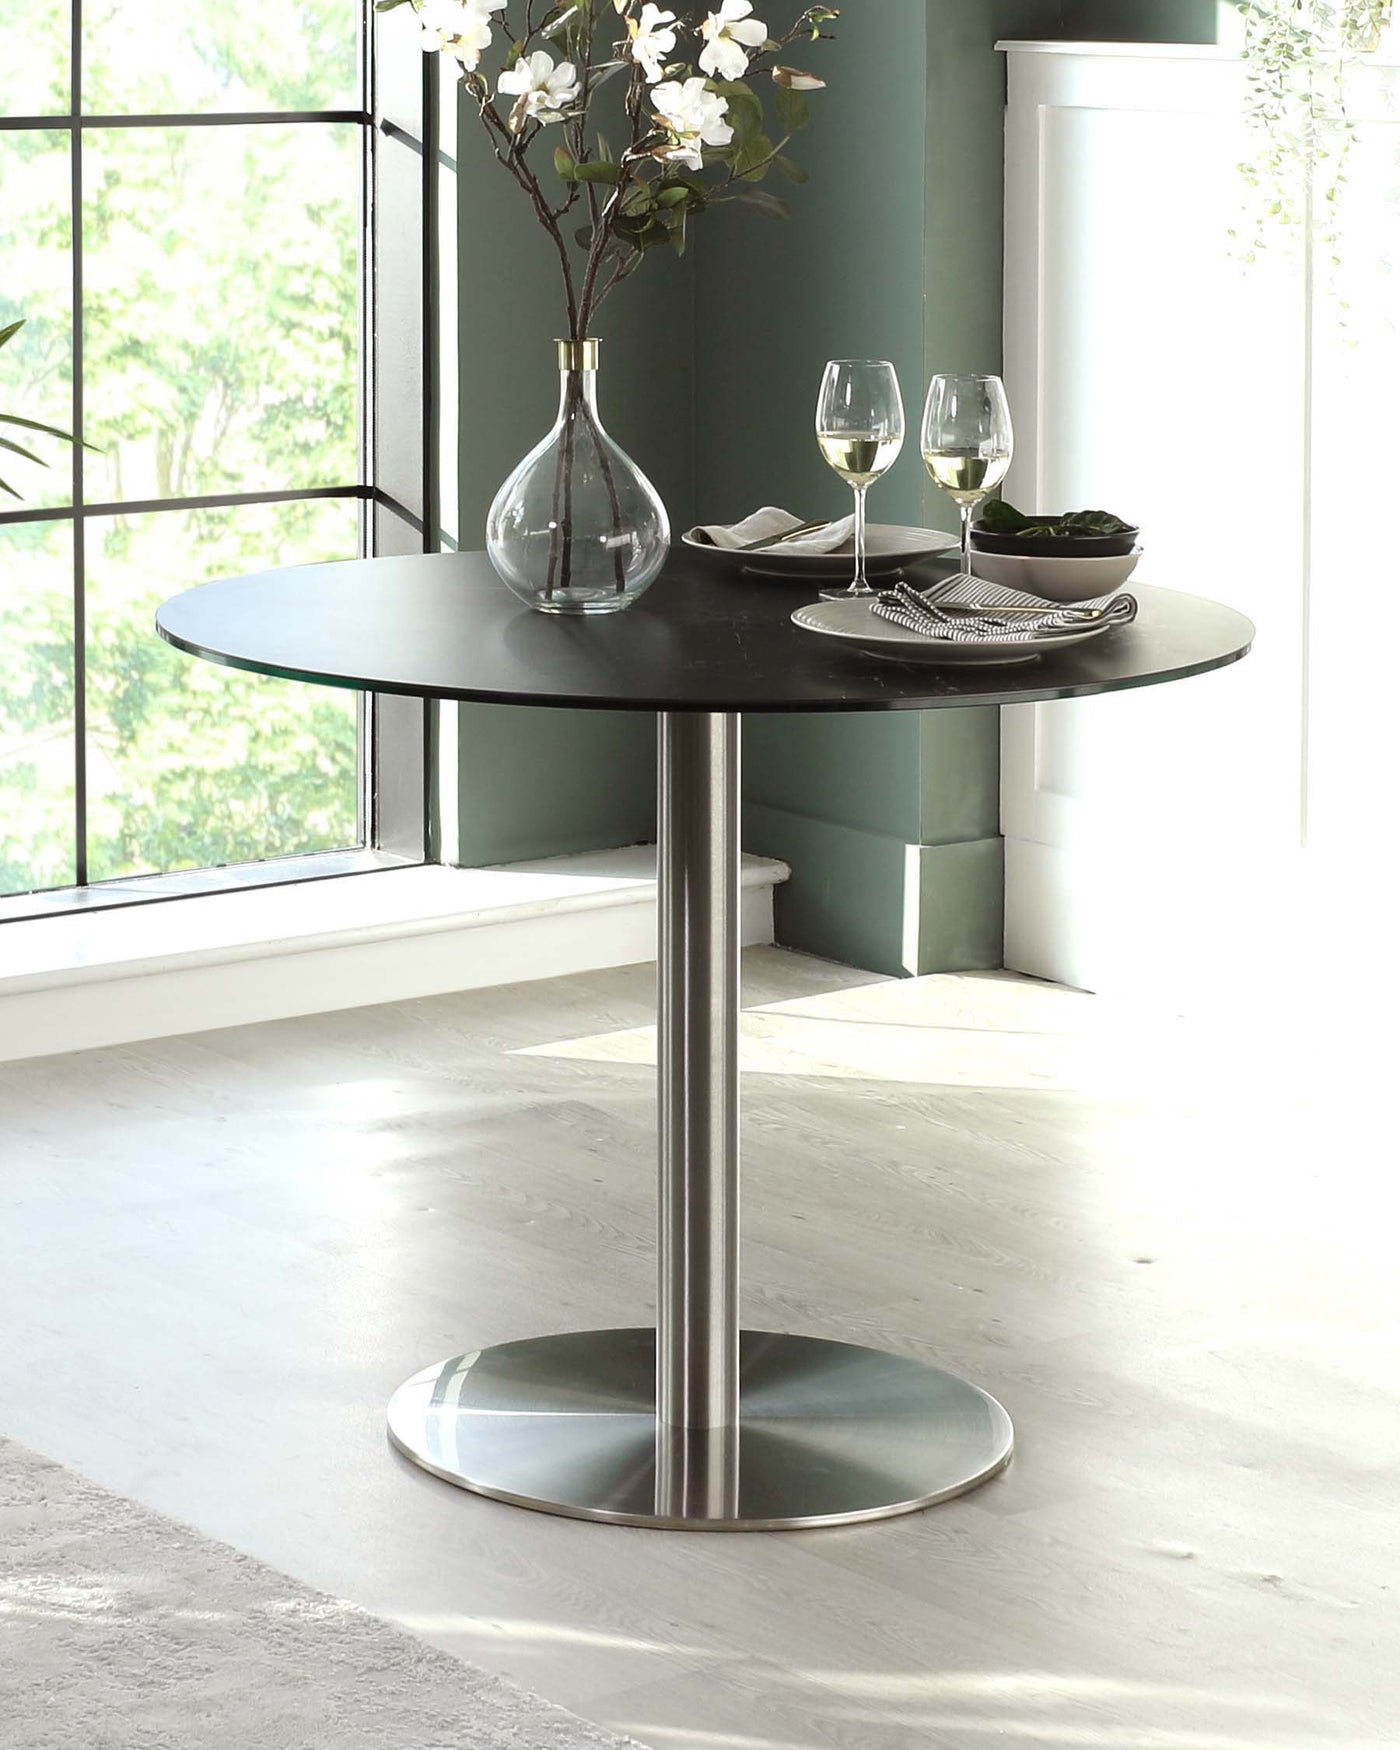 Romeo Black Marbled Ceramic and Polished Stainless Steel 4 Seater Dining Table